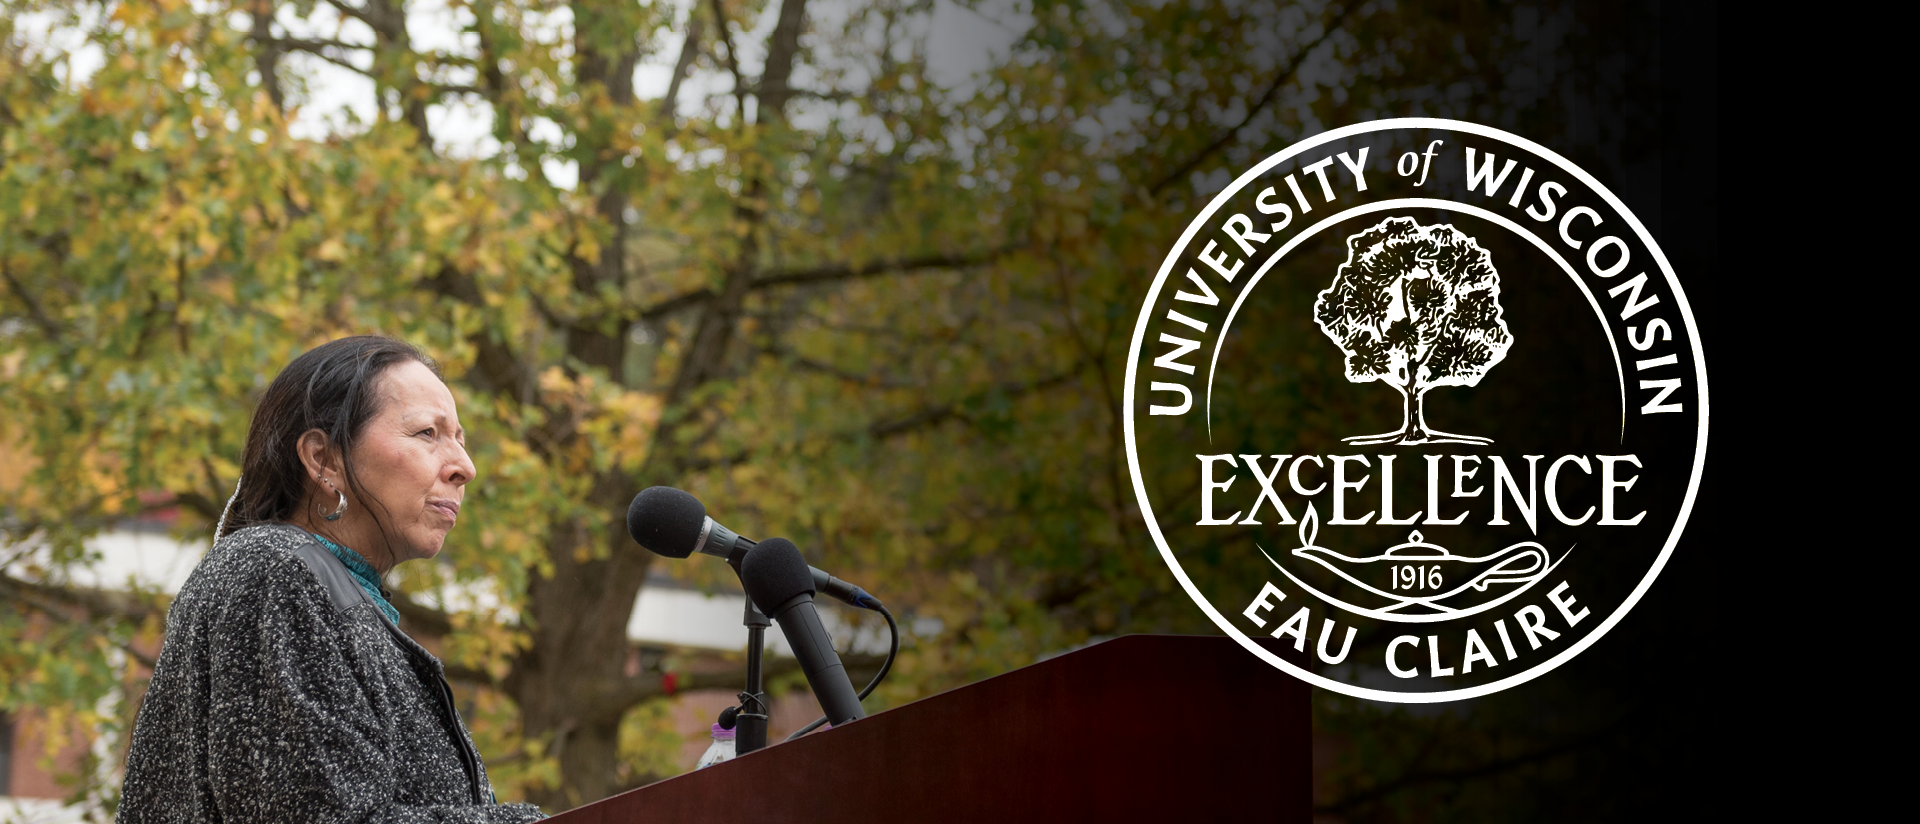 The University Seal prominently features the Council Oak tree and the word “Excellence"